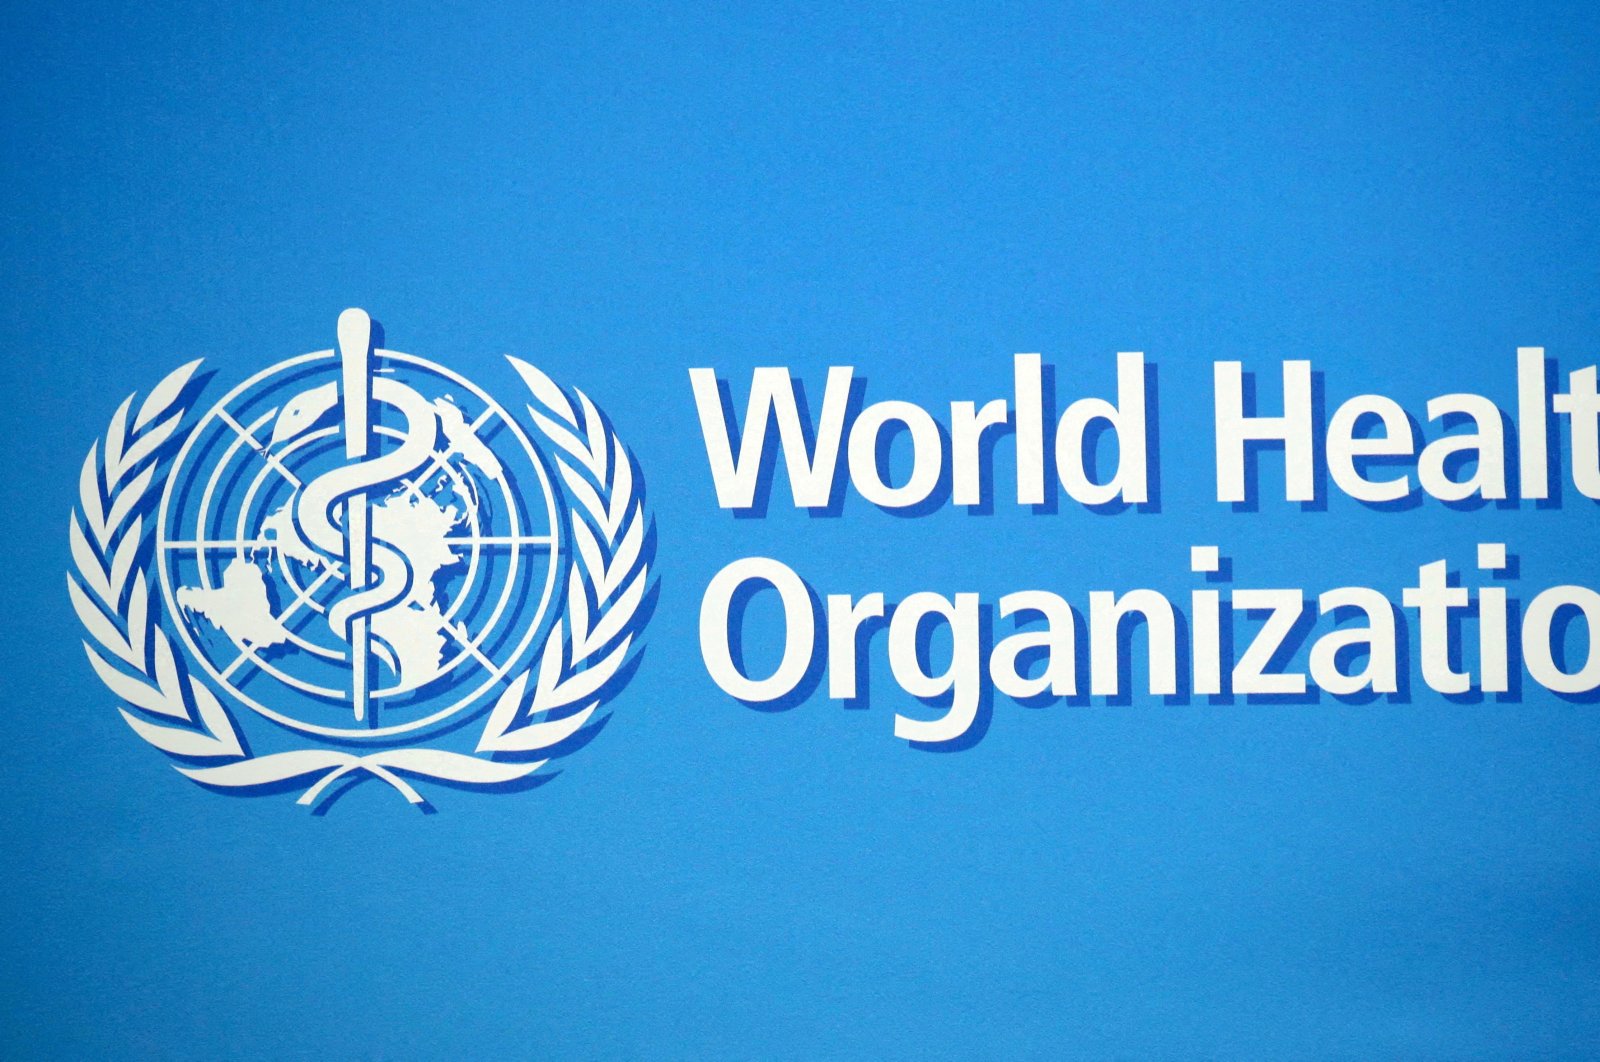 A logo is pictured at the World Health Organization (WHO) building in Geneva, Switzerland, Feb. 2, 2020. (Reuters Photo)